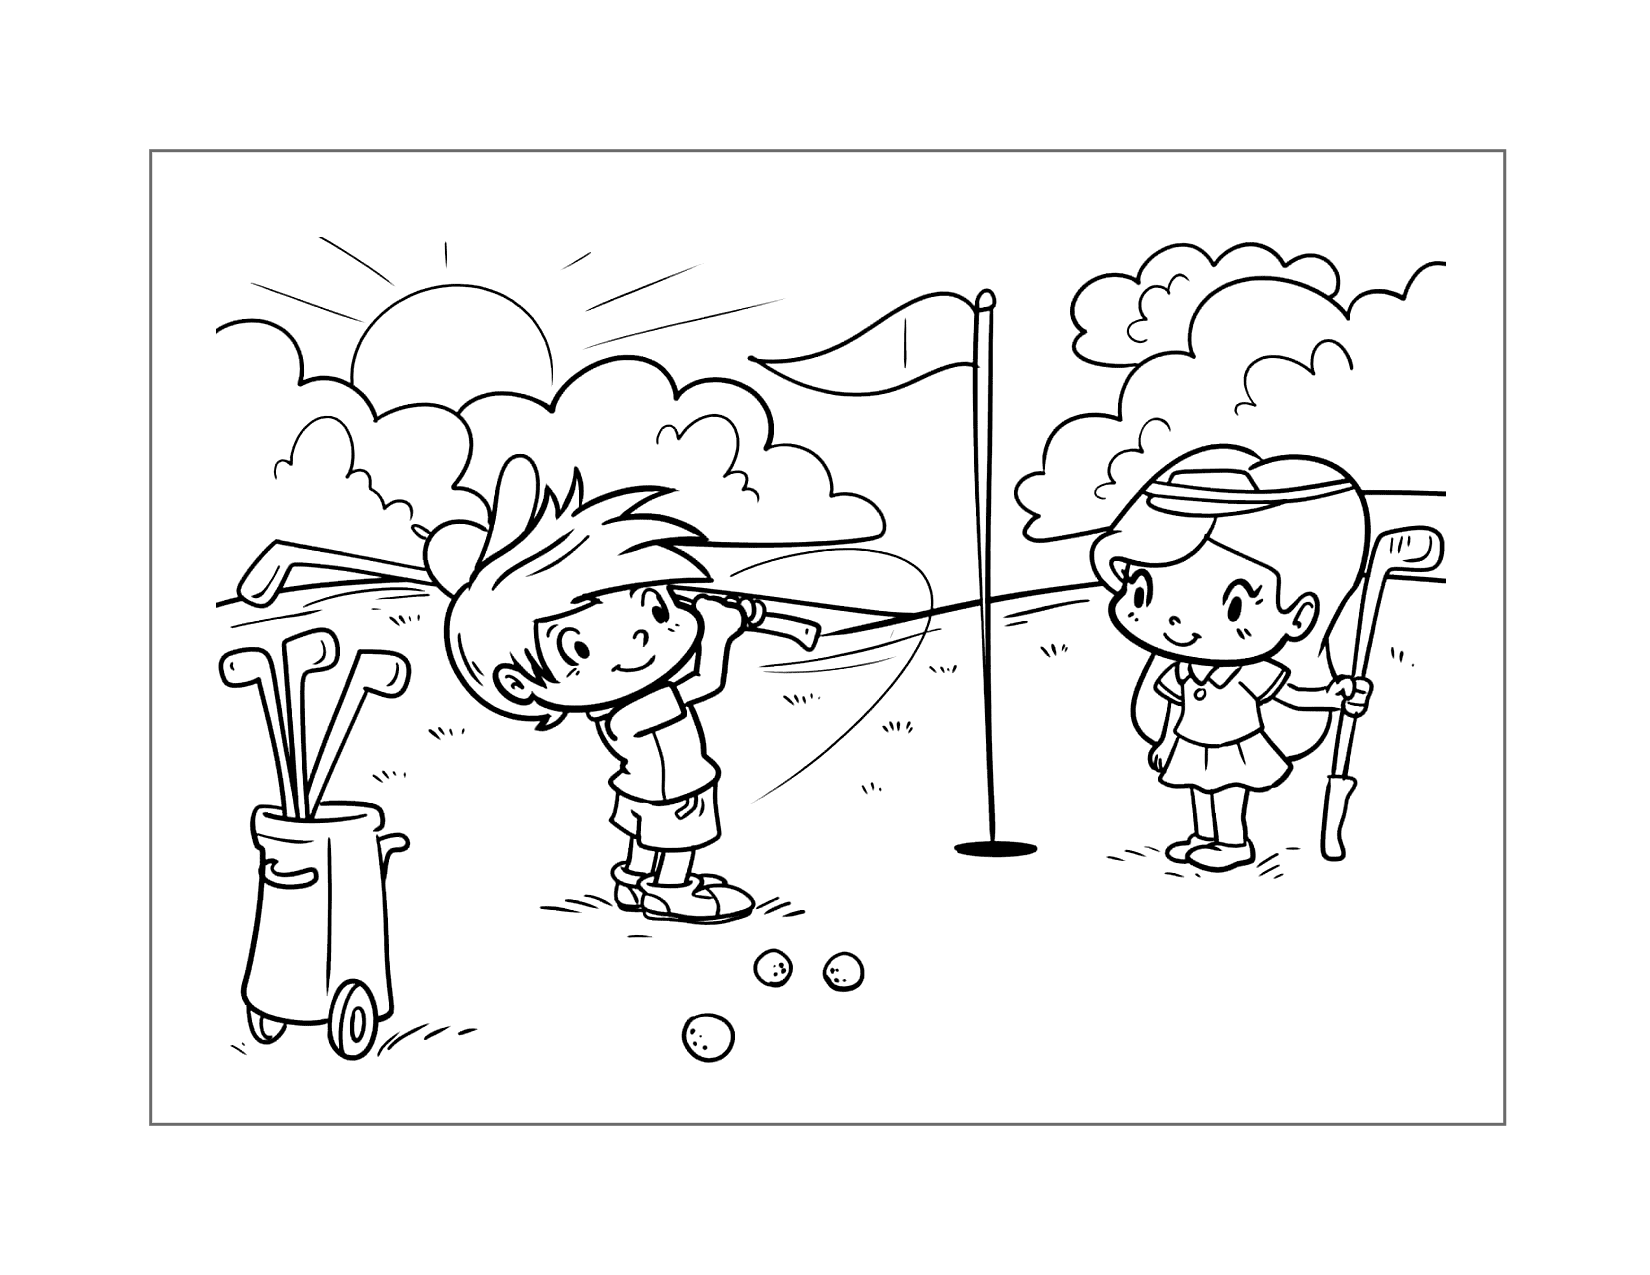 Cartoon Children Playing Golf Coloring Page